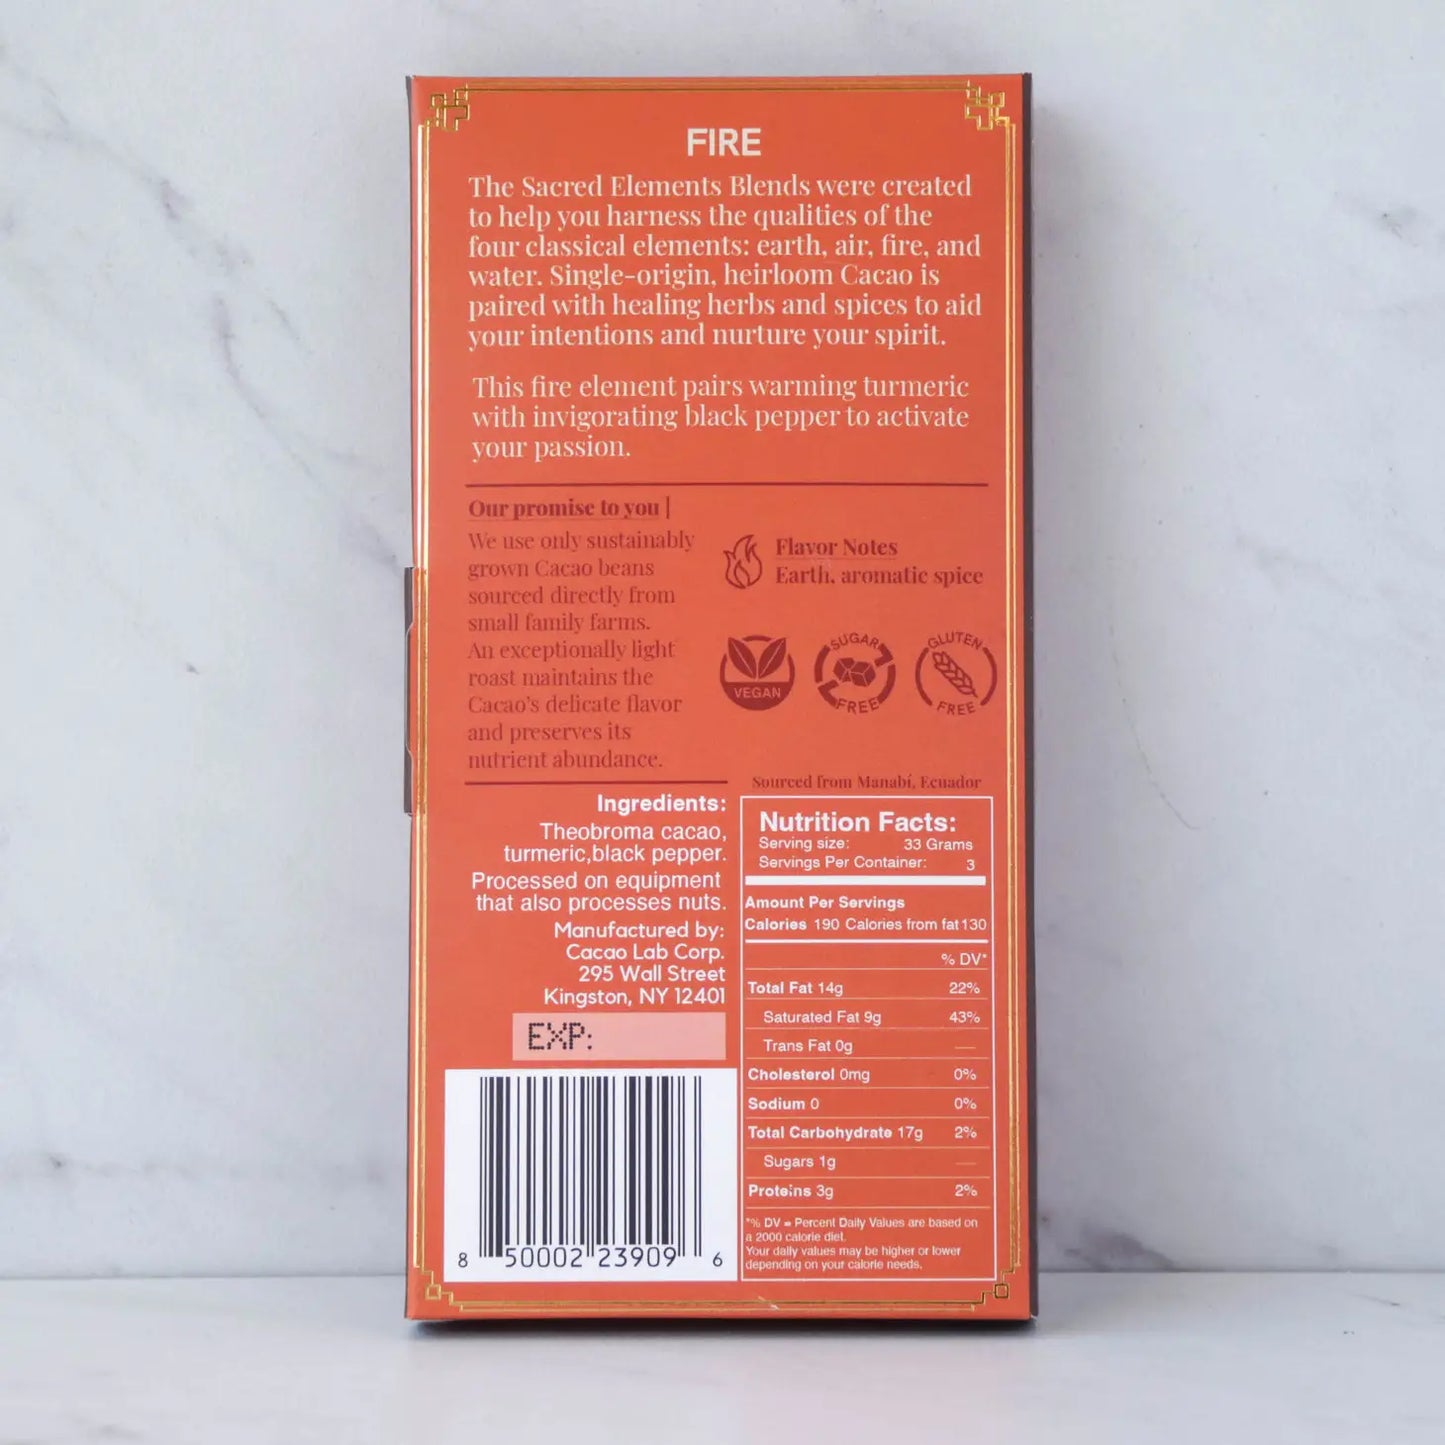 Ceremonial Grade Cacao Bar - Fire Element Black Pepper & Turmeric by The Cacao Laboratory (COMING SOON)